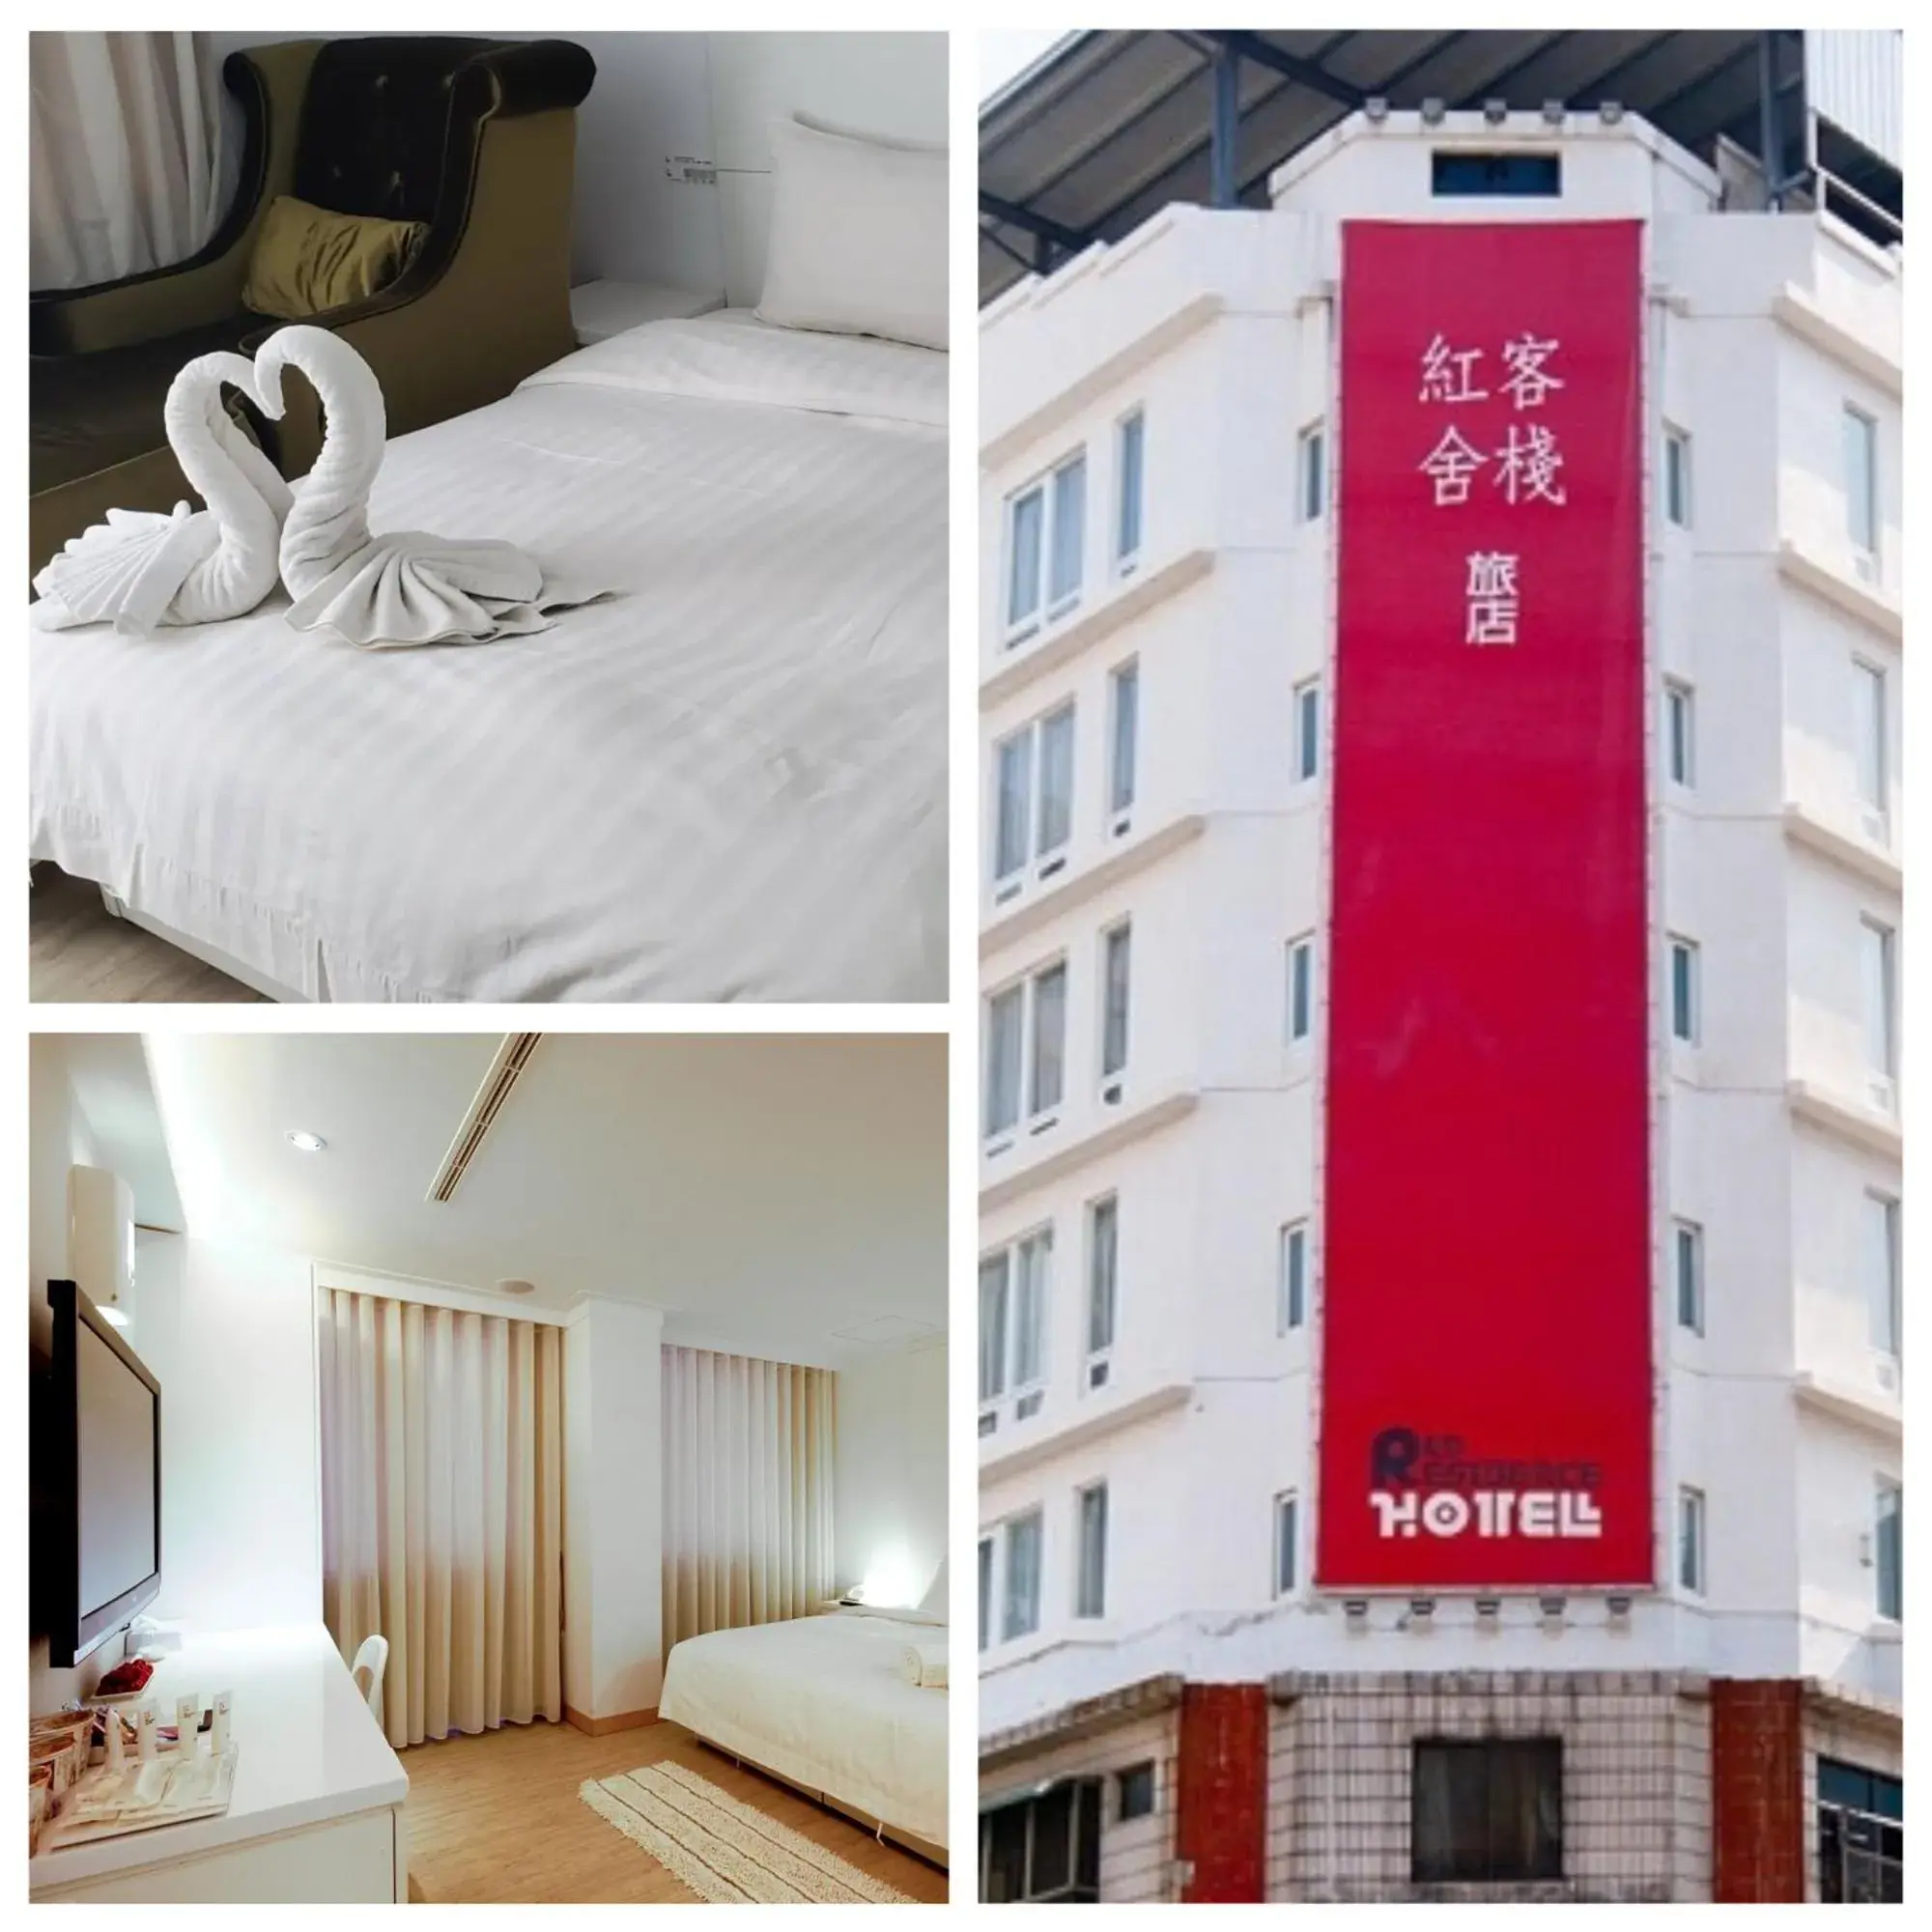 Red Residence Hotel